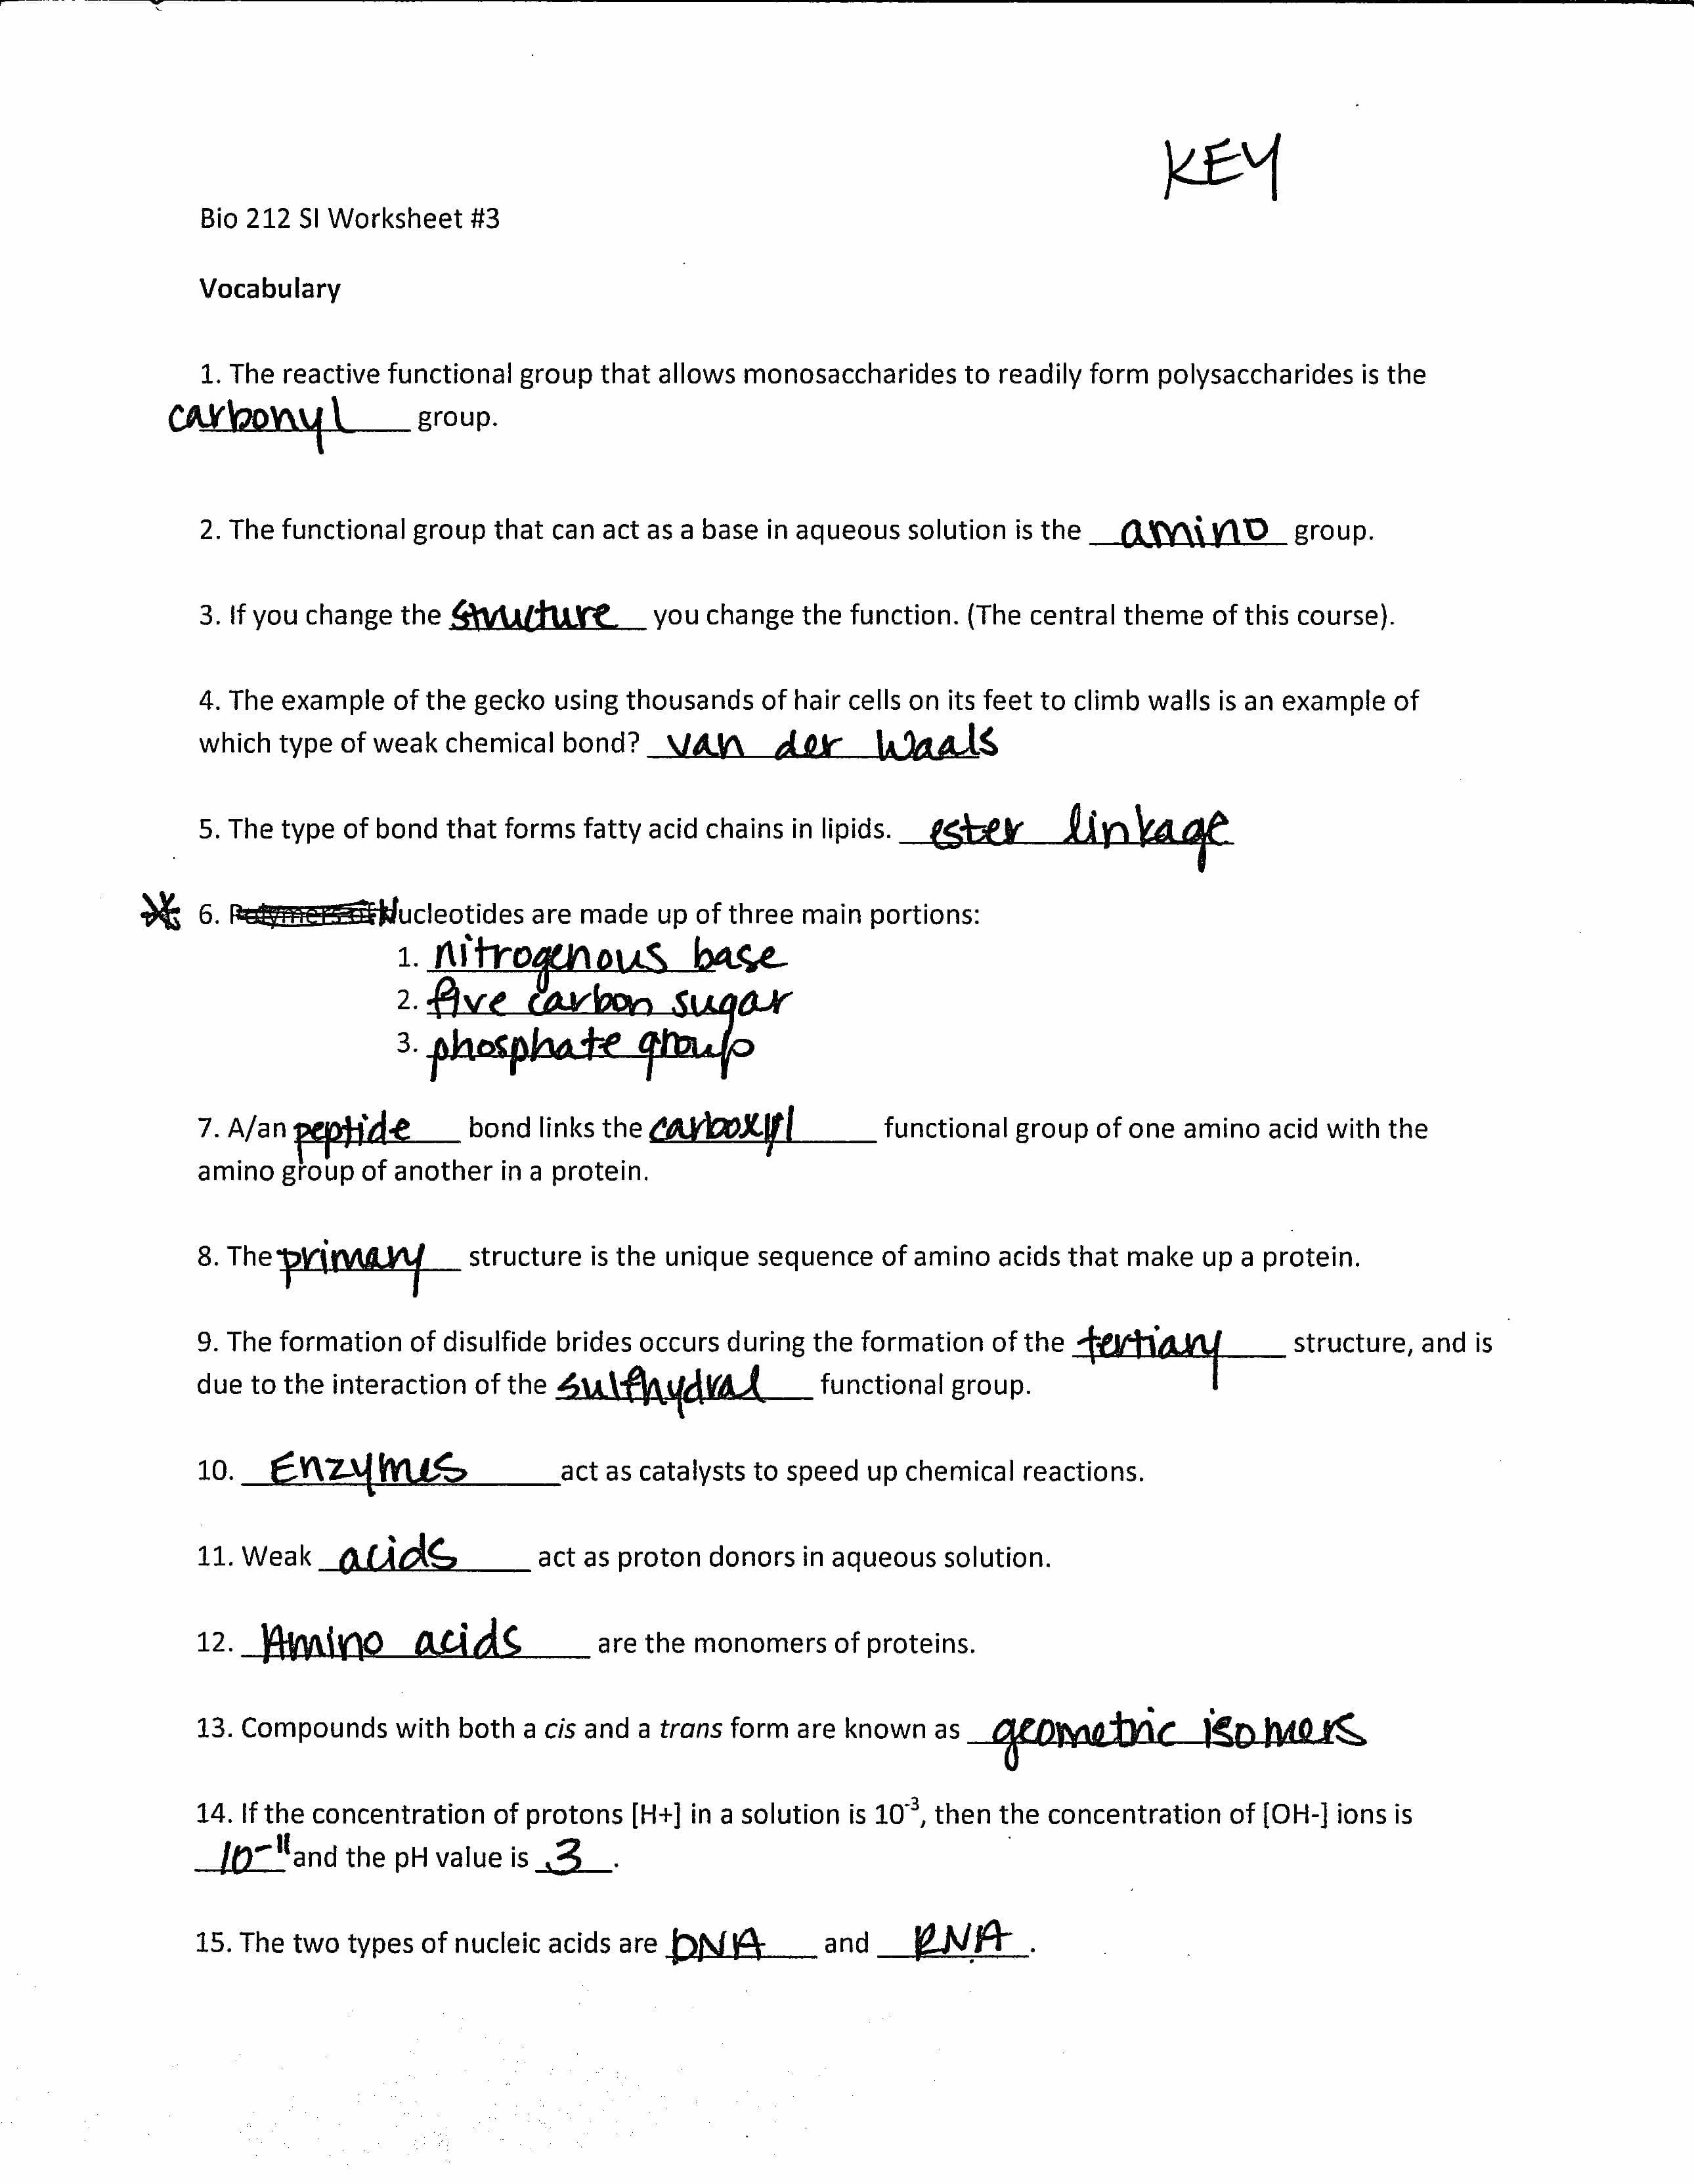 Dna And Replication Worksheet Answers Adding And Subtracting As Well As Dna Practice Worksheet